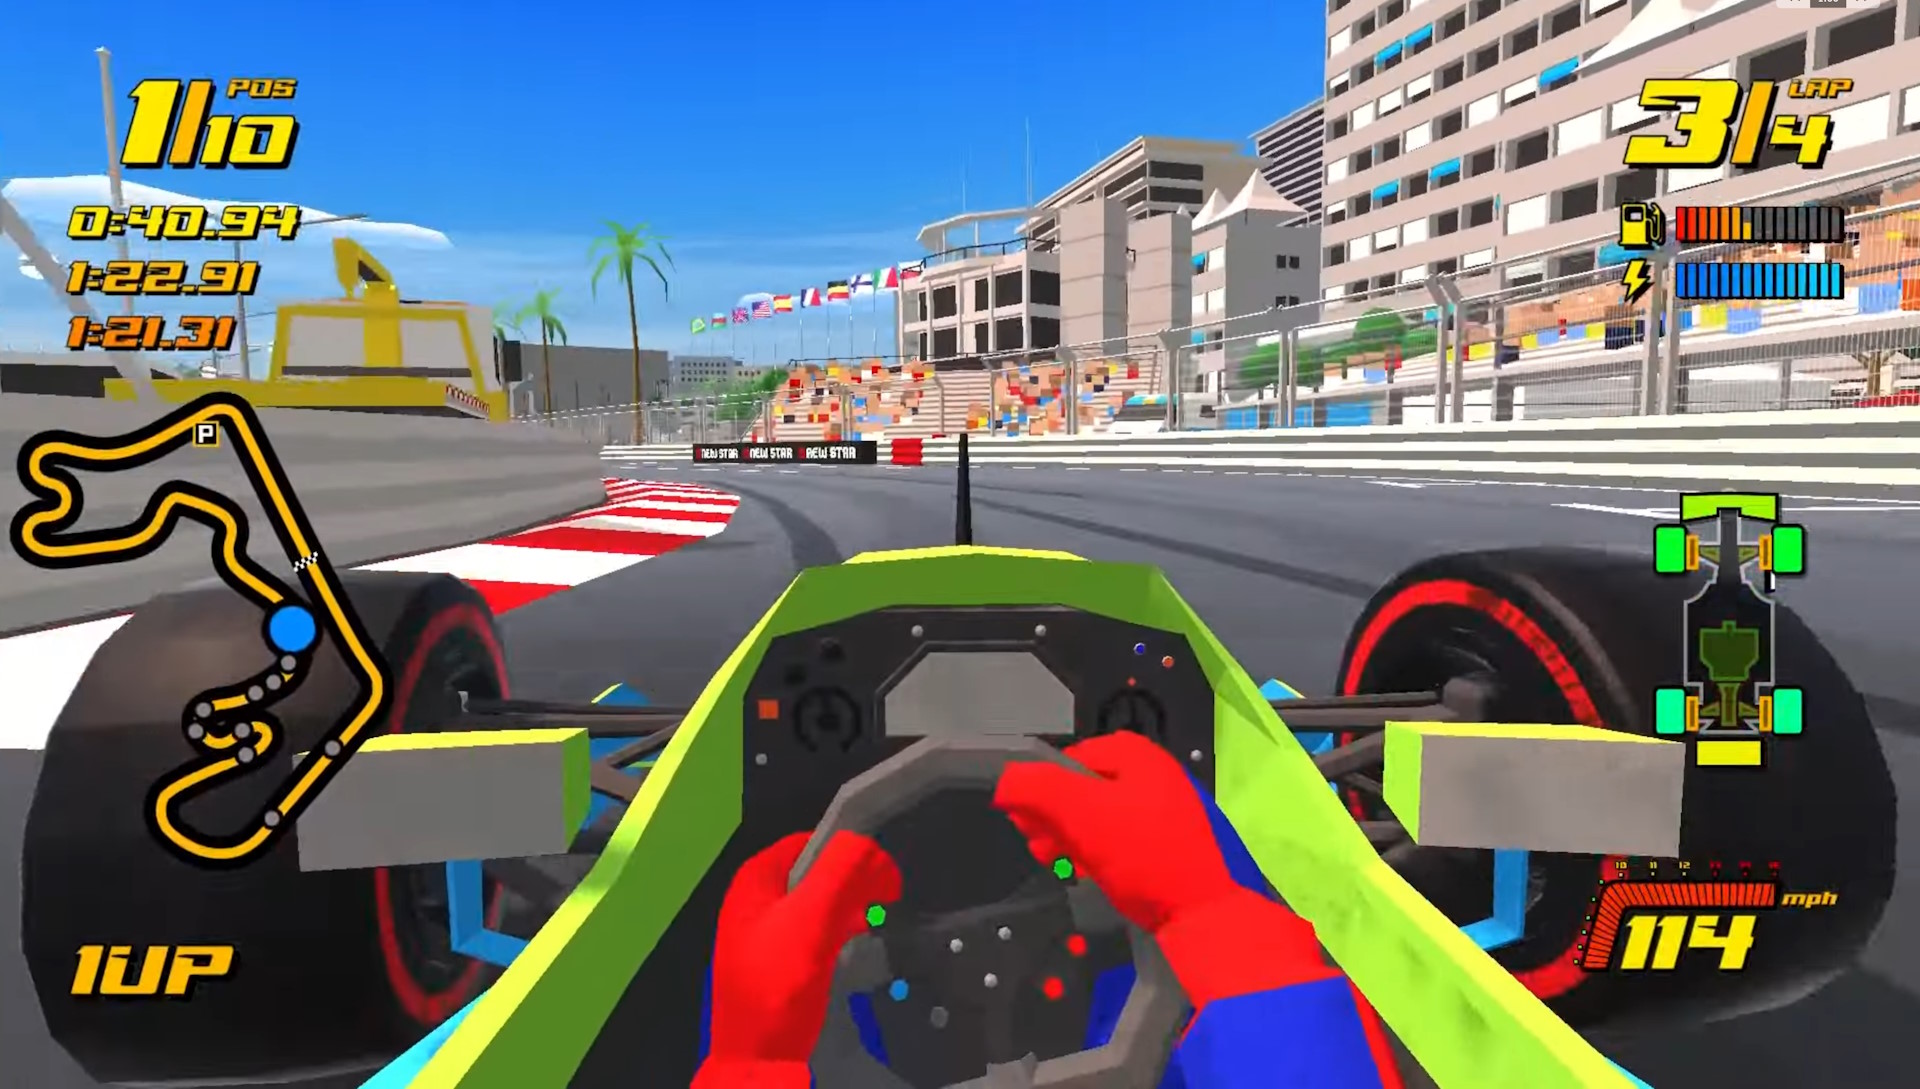  This upcoming arcade racing game promises to be a throwback to the '90s in more ways than one 